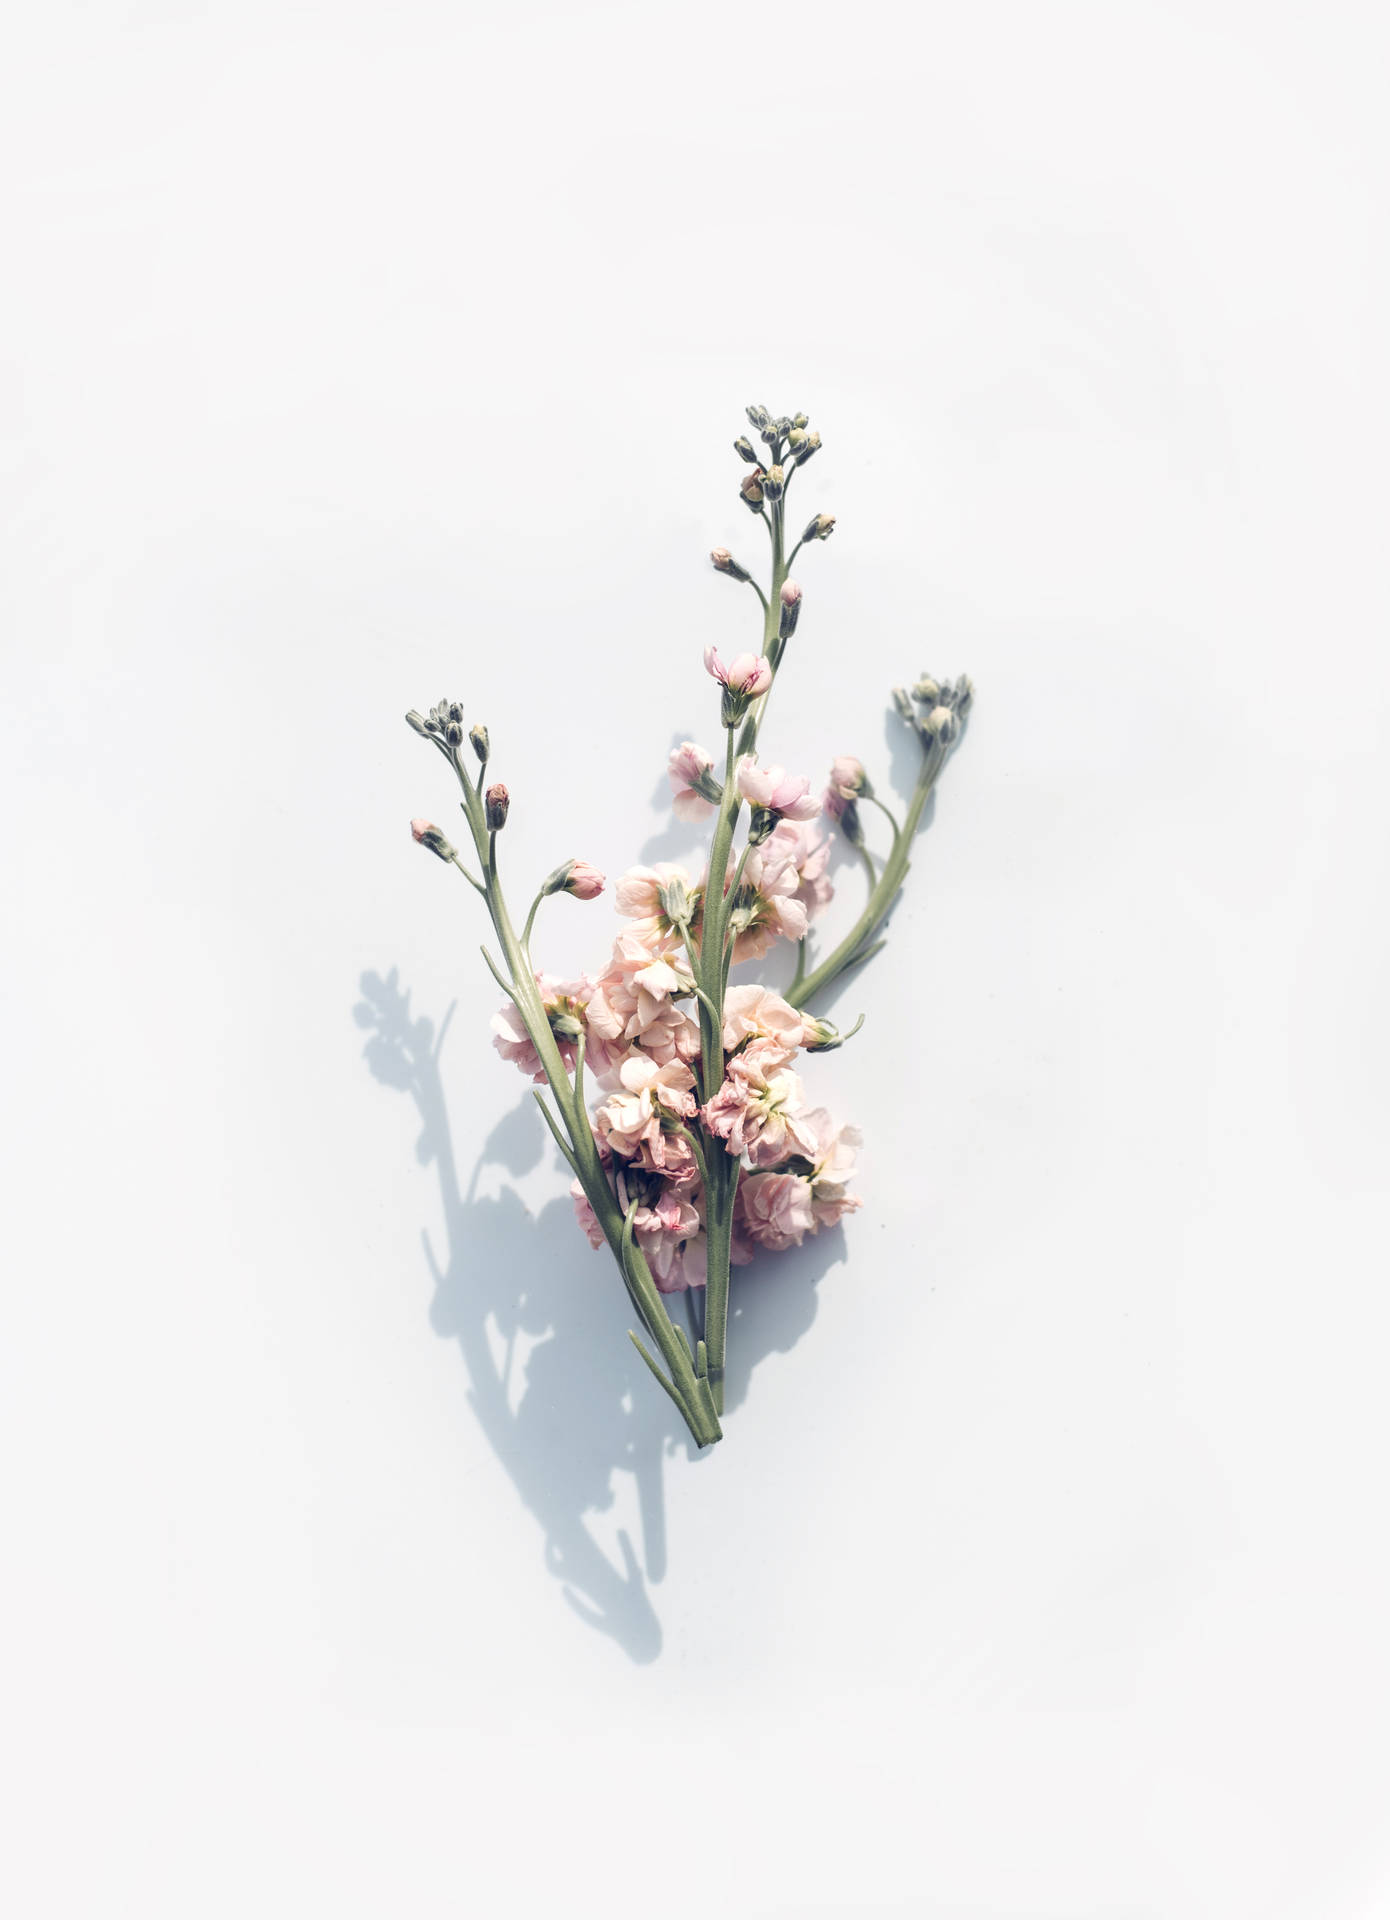 4016X5546 Floral Wallpaper and Background